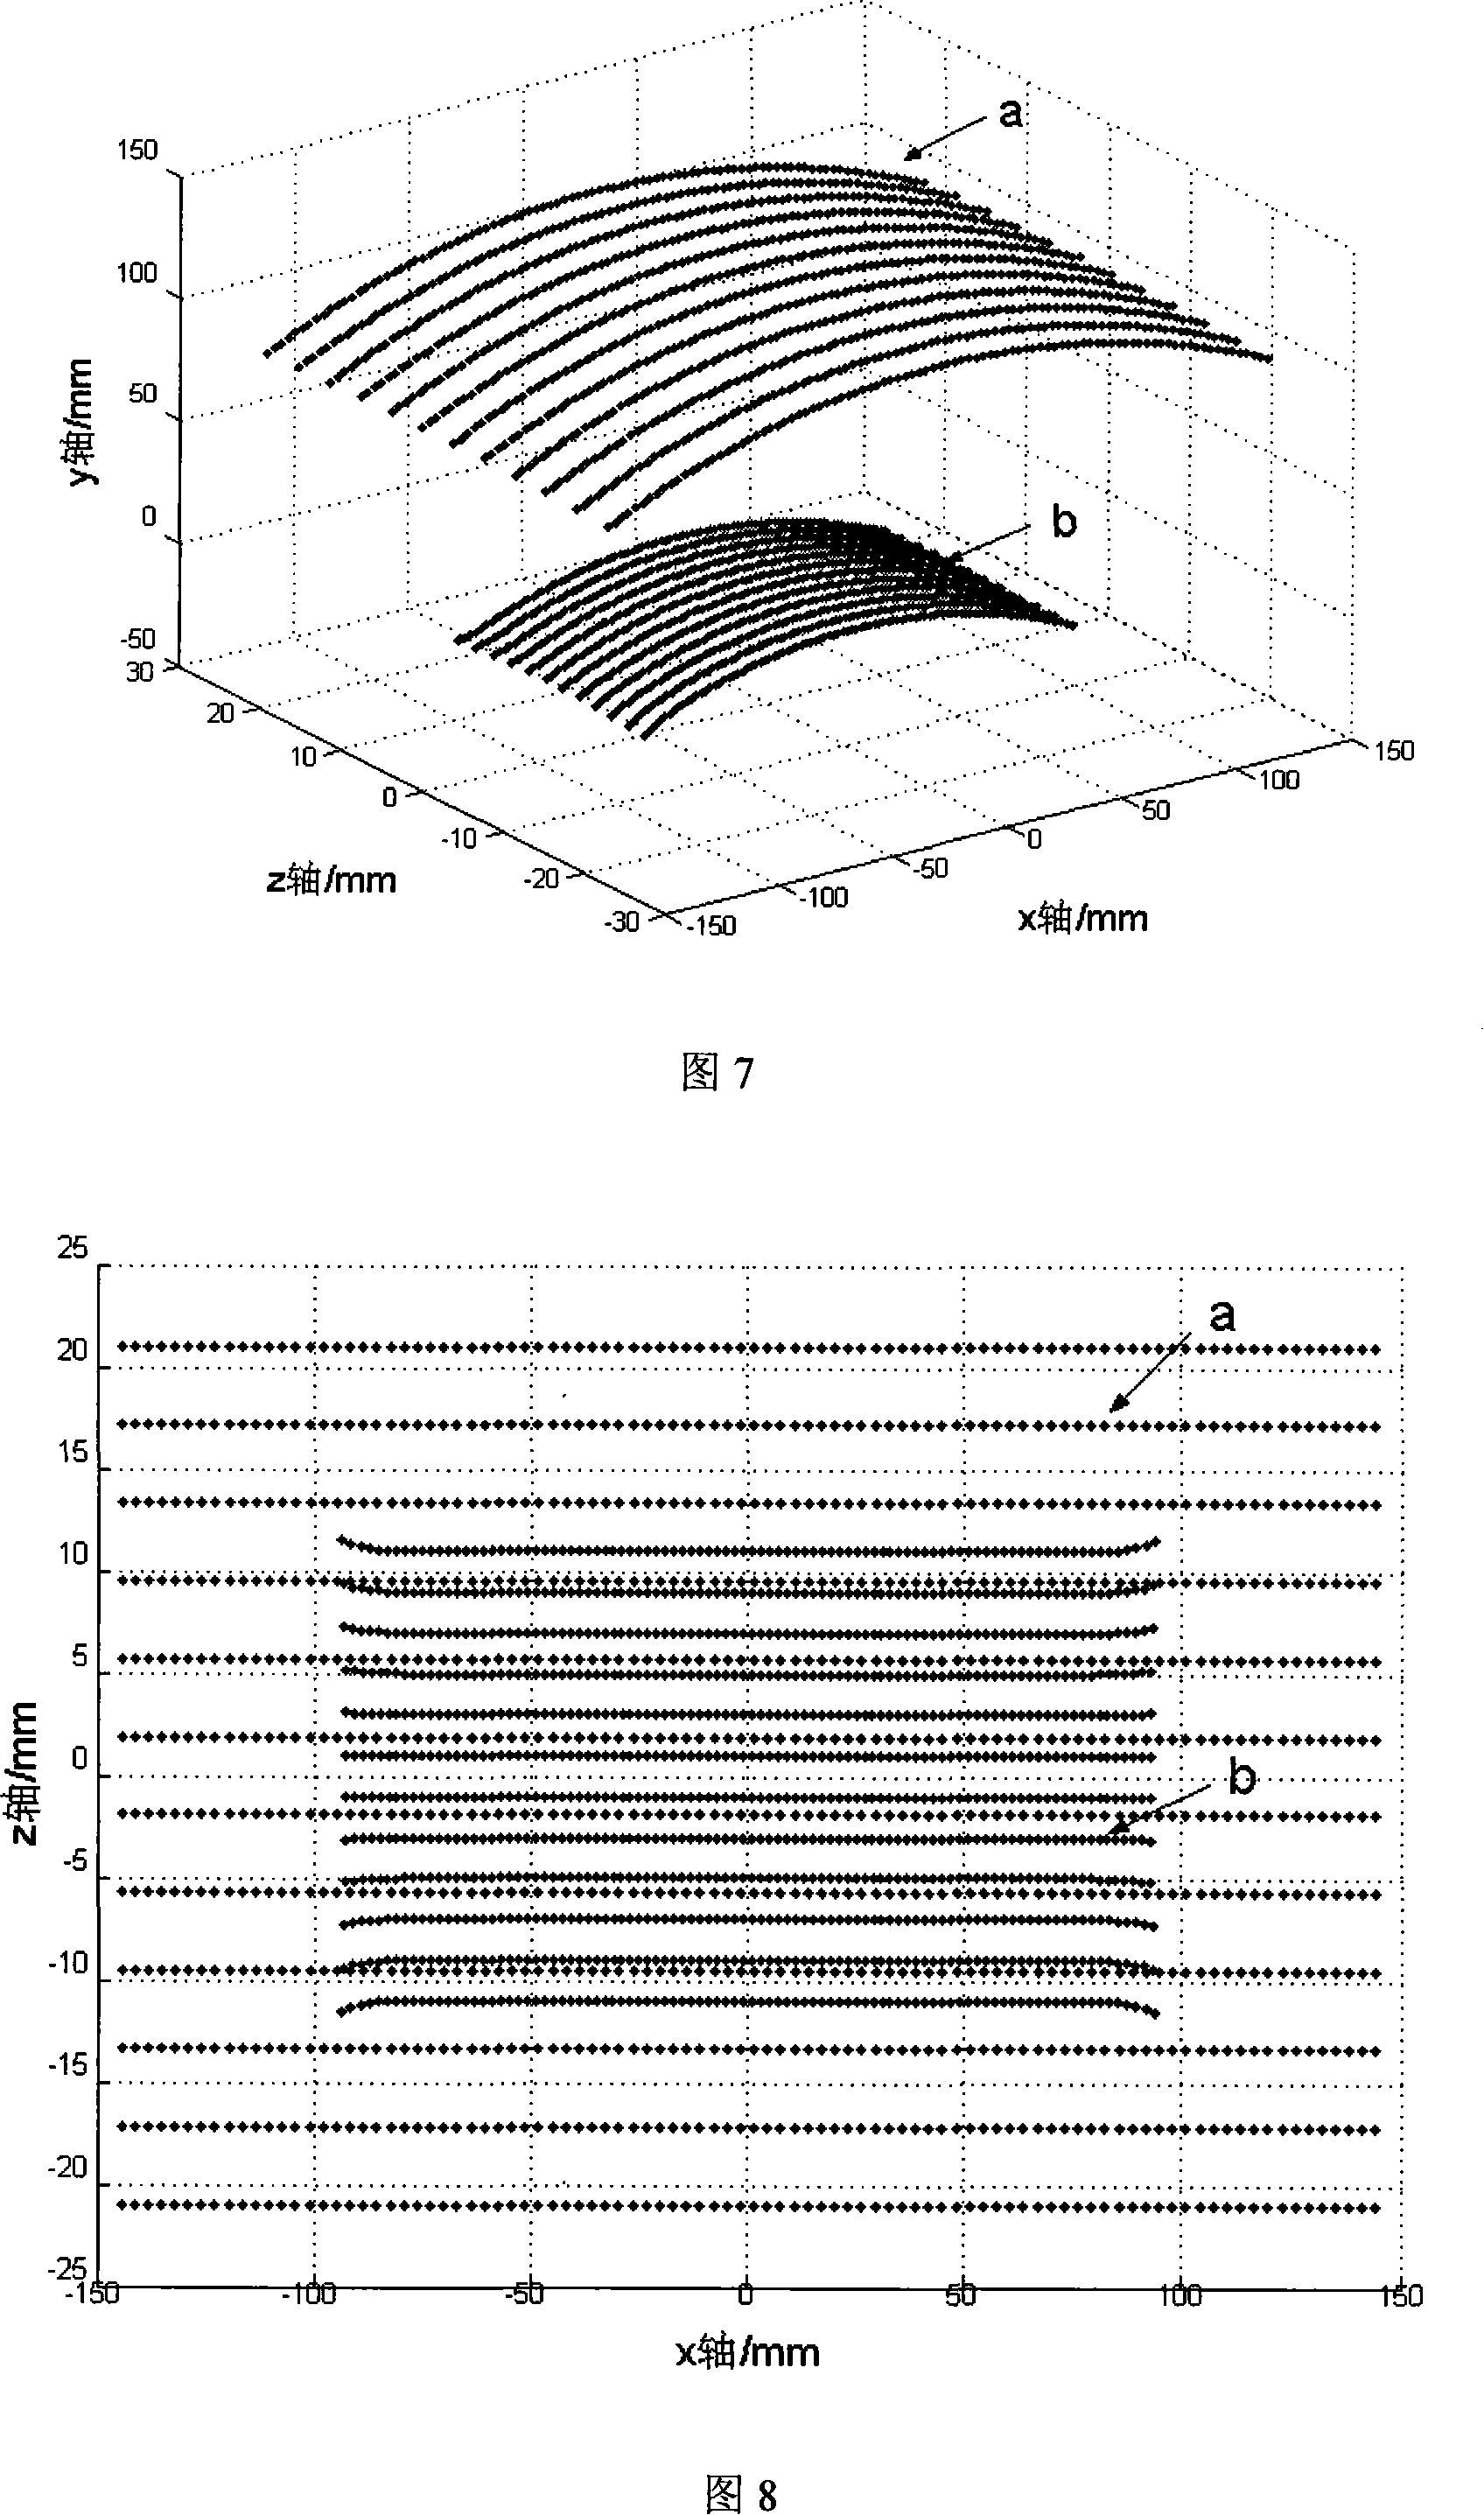 Parallel grinding and cutting method for non-axial-symmetry and non-ball-surface optical element